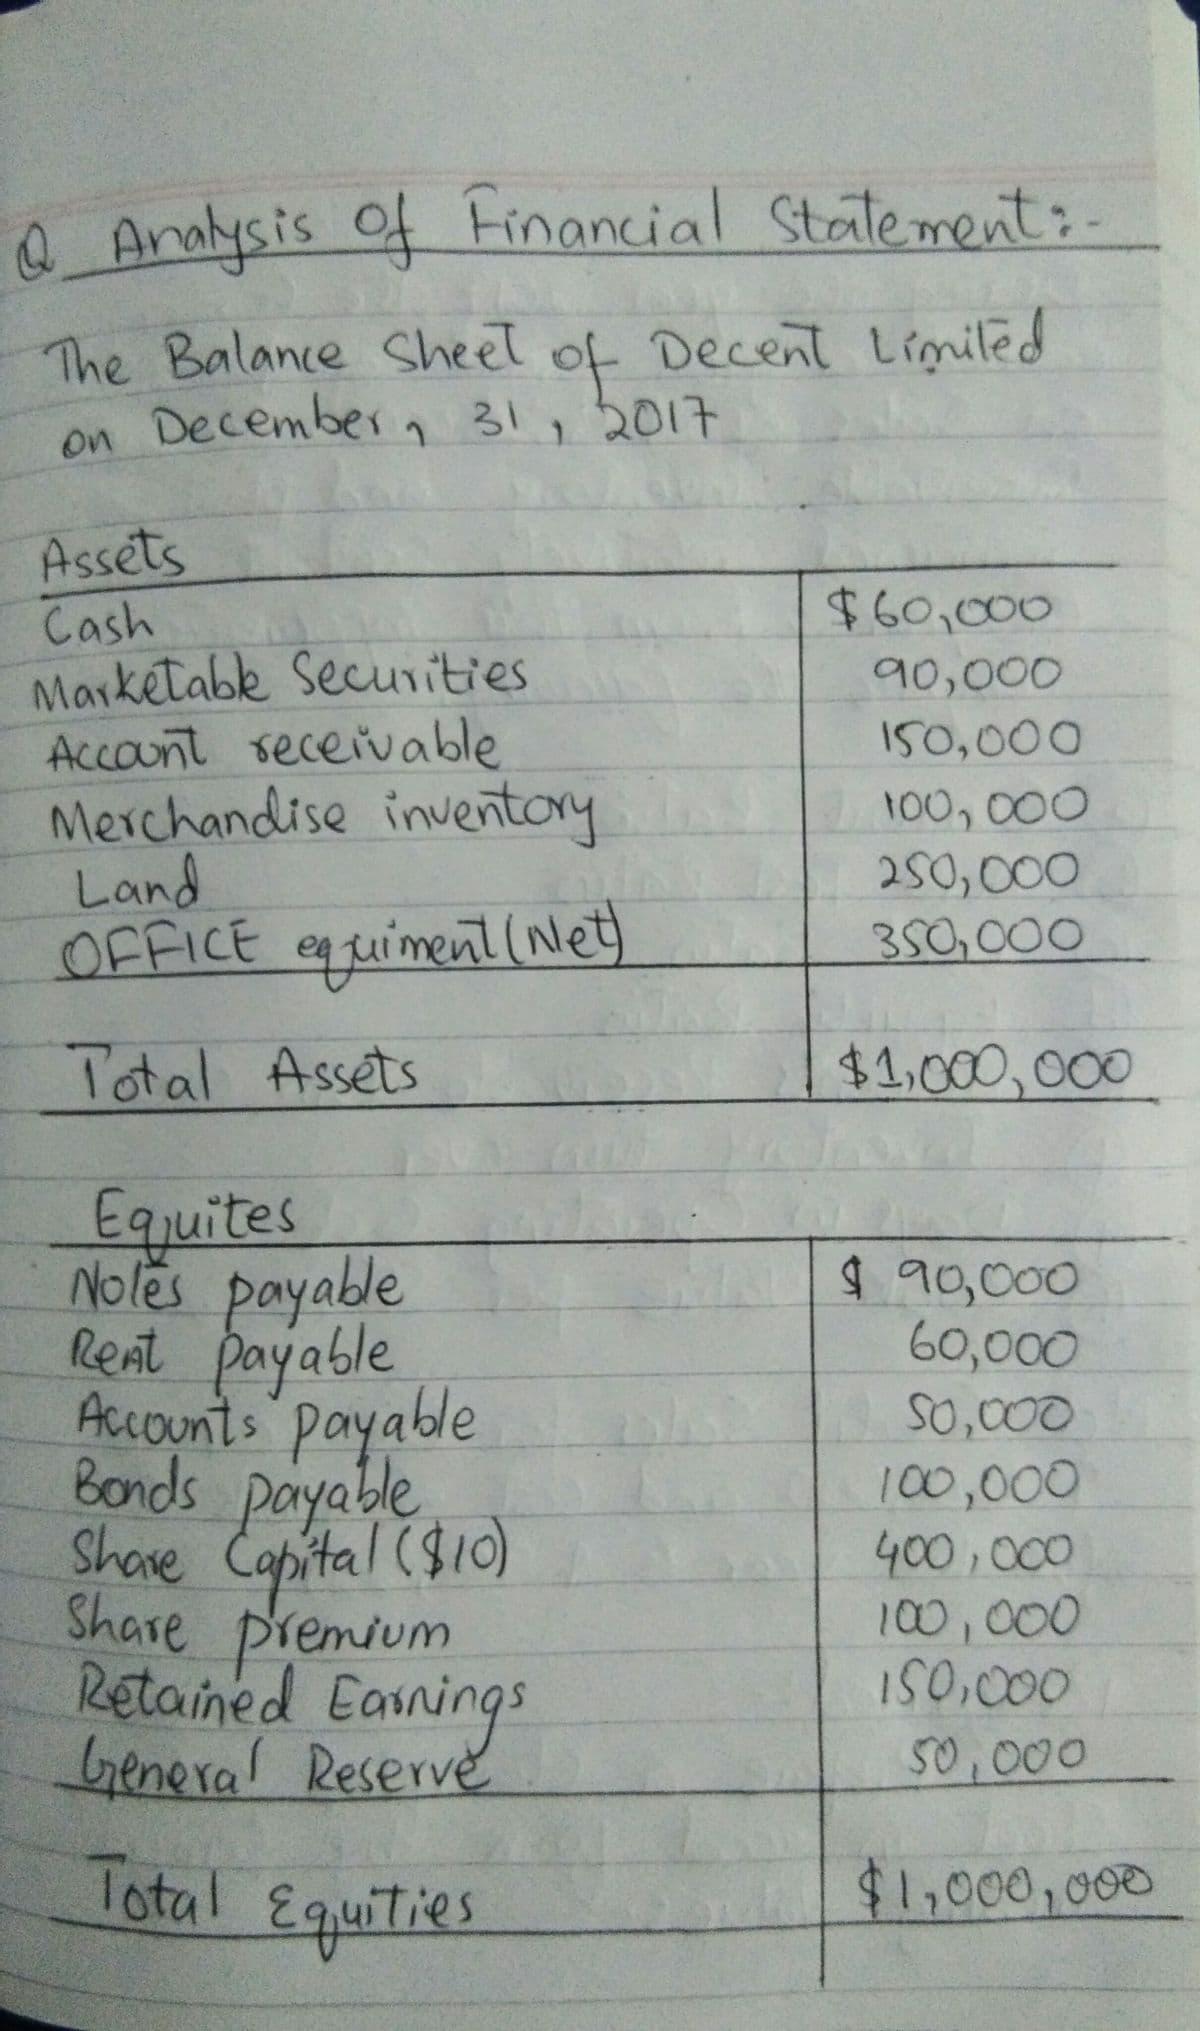 QAnalysis
of Financial Statement:.
The Balance Sheet
of
Decent Limiled
on December 131, 2017
Assets
$60,000
Cash
Marketable Securities
Account seceivable
Merchandise inventory
Land
OFFICE equiment (Net)
90,000
150,000
100,000
250,000
350,000
Total Assets
$1,000,000
Equites
Noles payable
Reat payable
Accounts payable
Bonds payable
Share Capital ($10)
Share premium
Retained Earnings
General Reservě
9 90,000
60,000
So,000
100,000
400,000
100,000
150,000
50,000
Total Equities
$1,000,000
